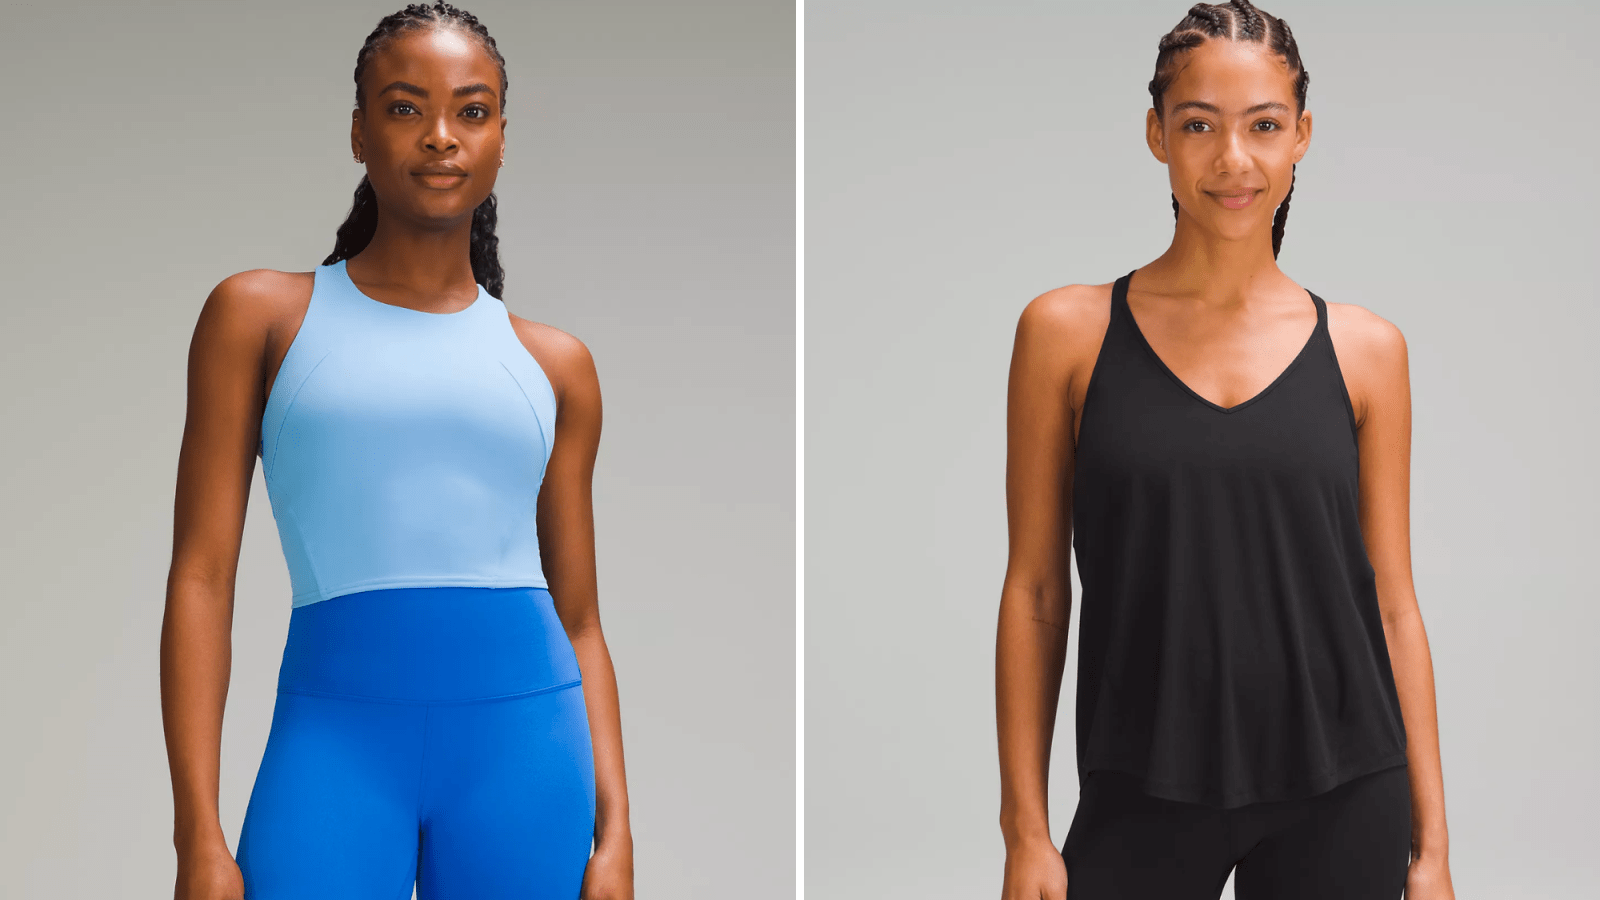 lululemon how to choose activewear for fall-10